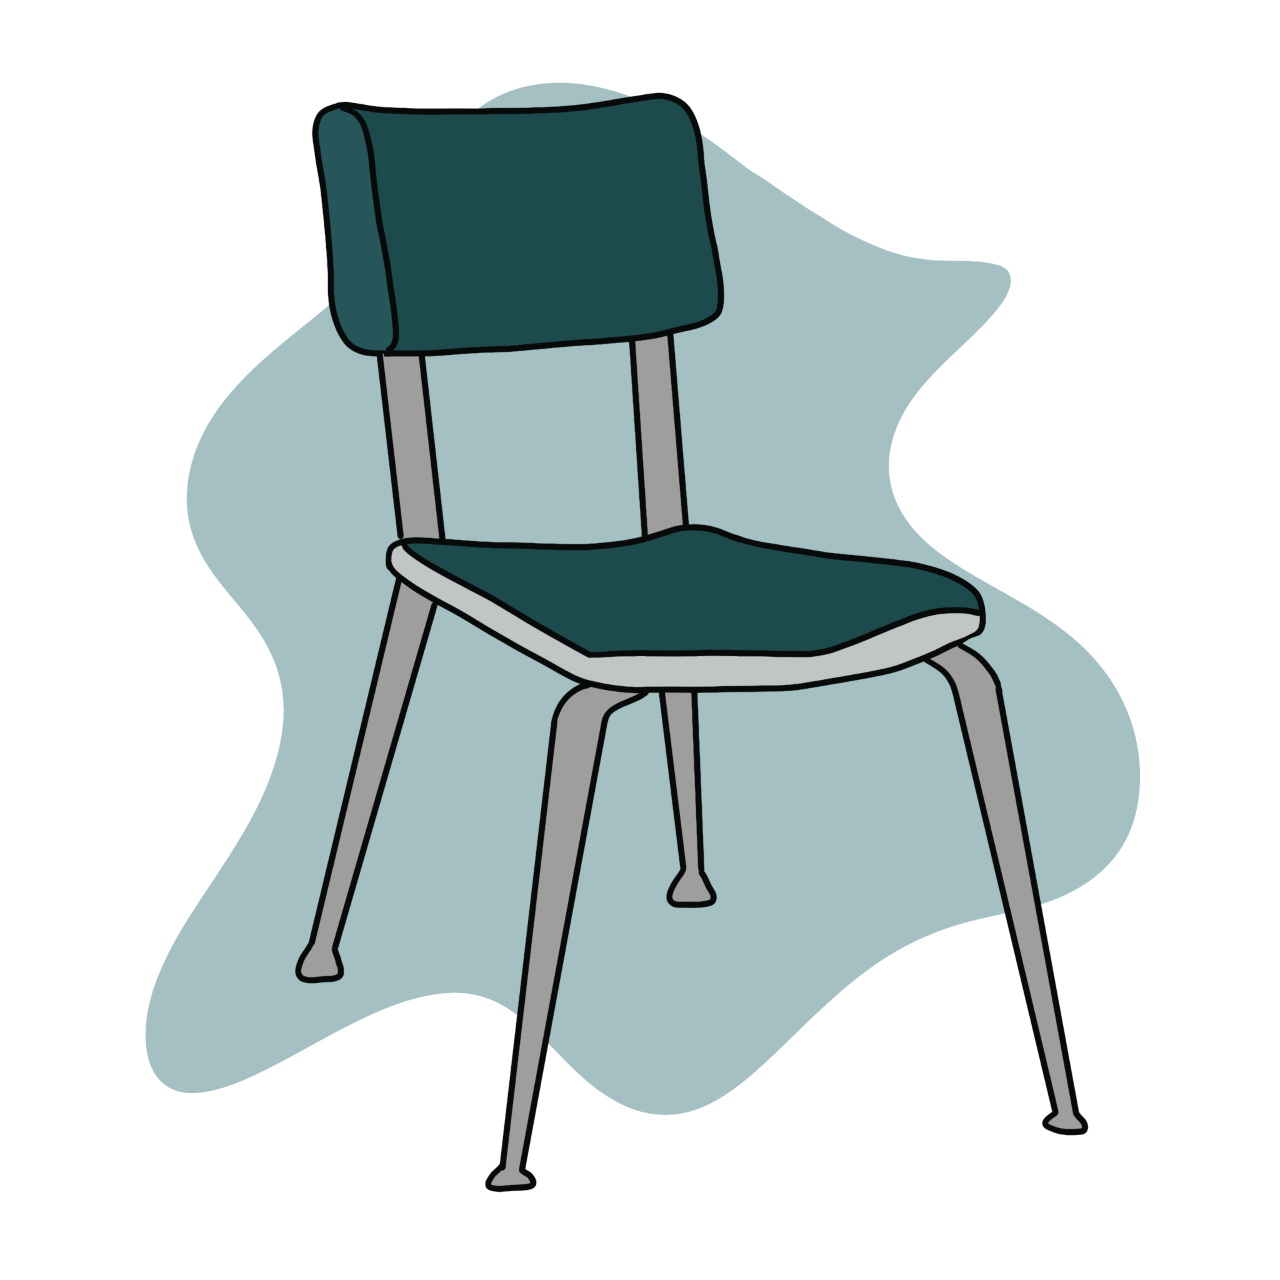 Drawing of a School Chair